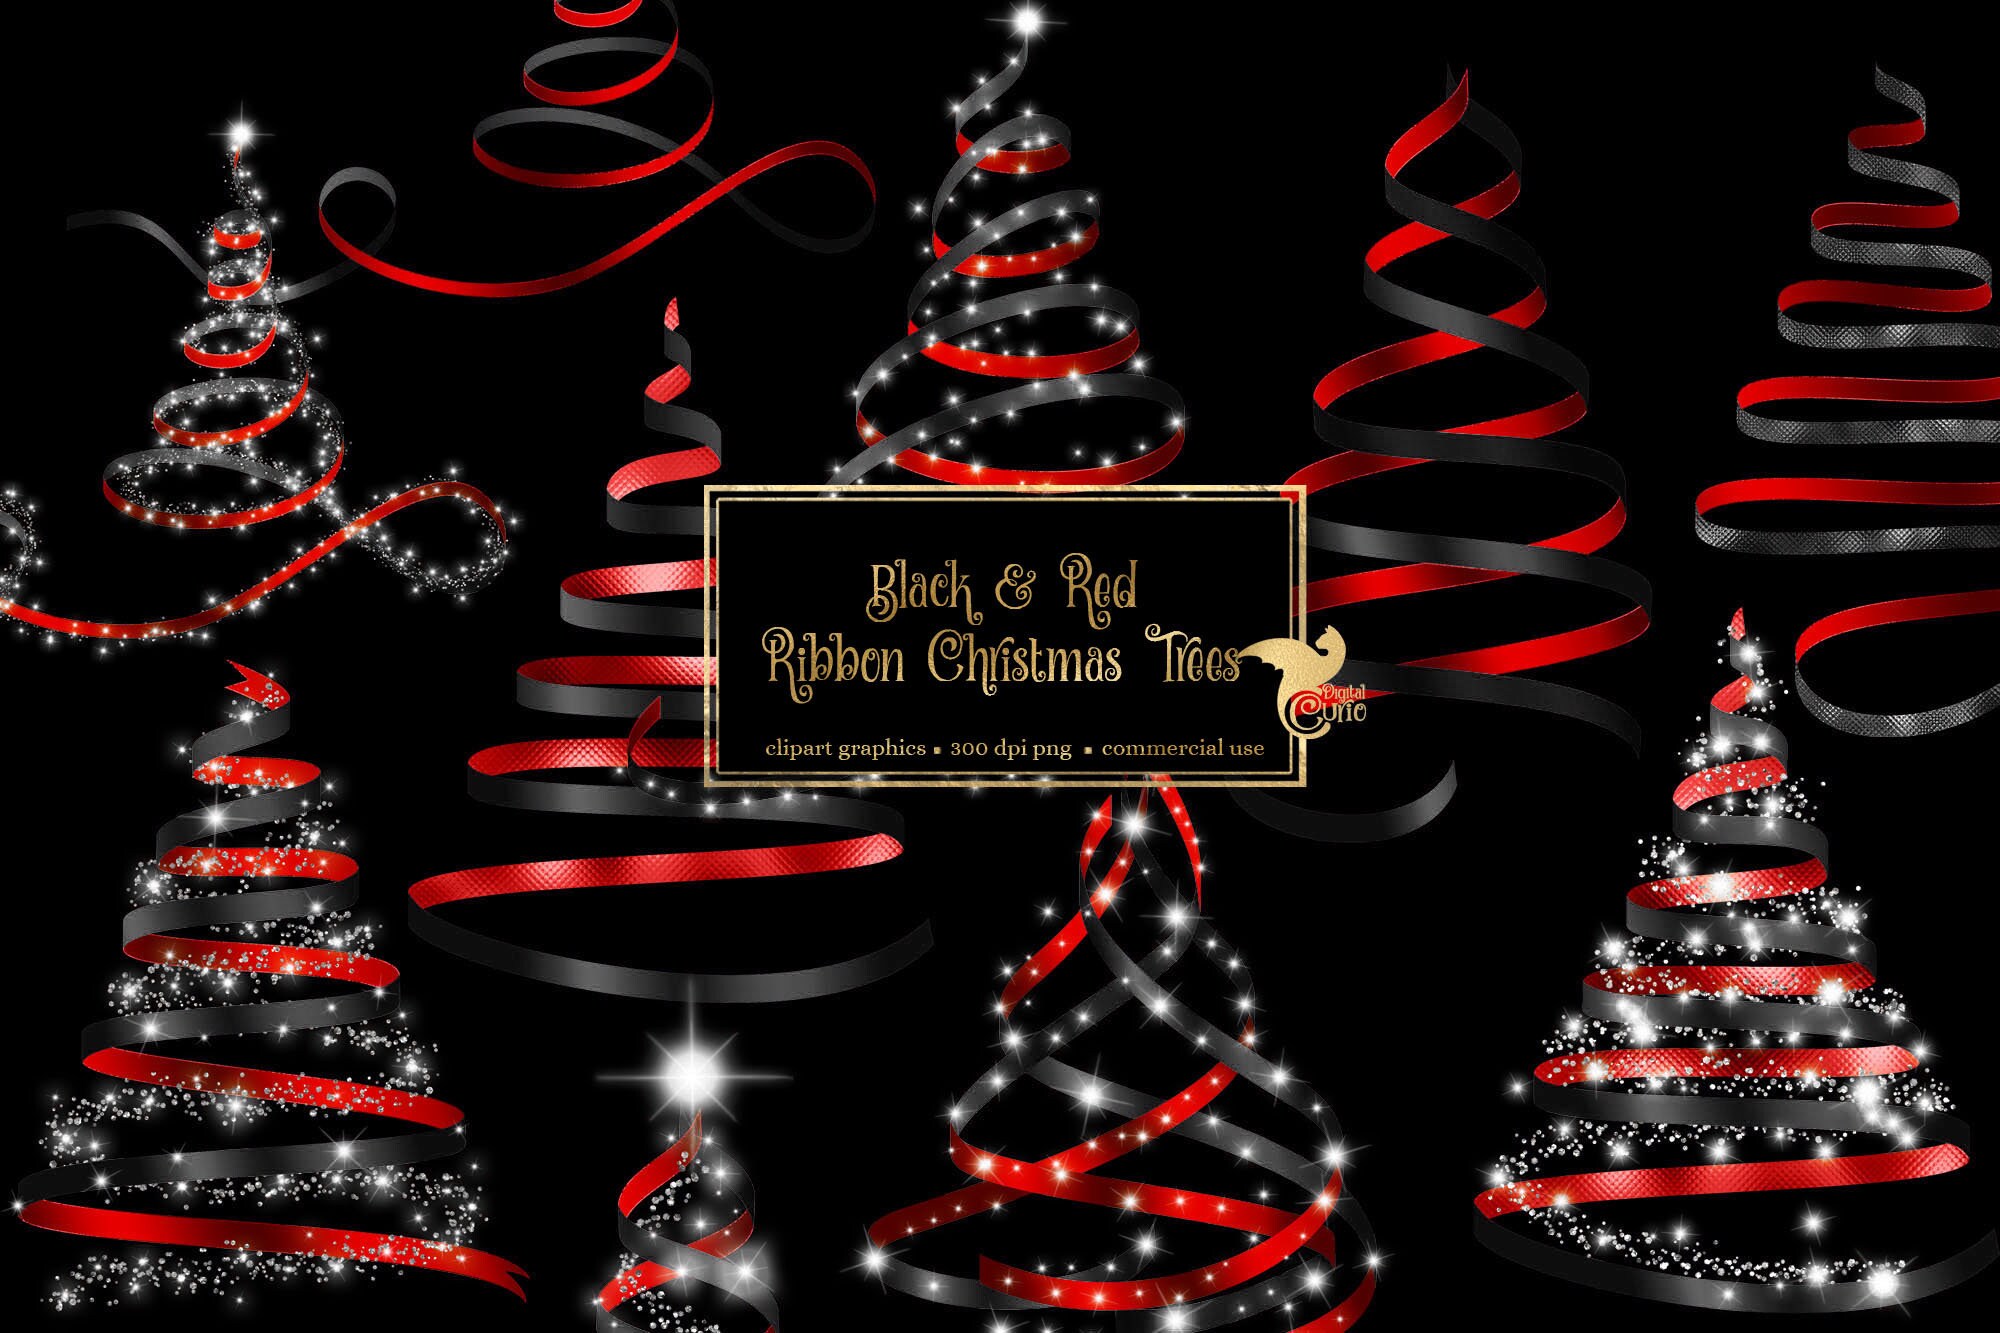 Black and Silver Christmas Ornaments Graphic by Digital Curio